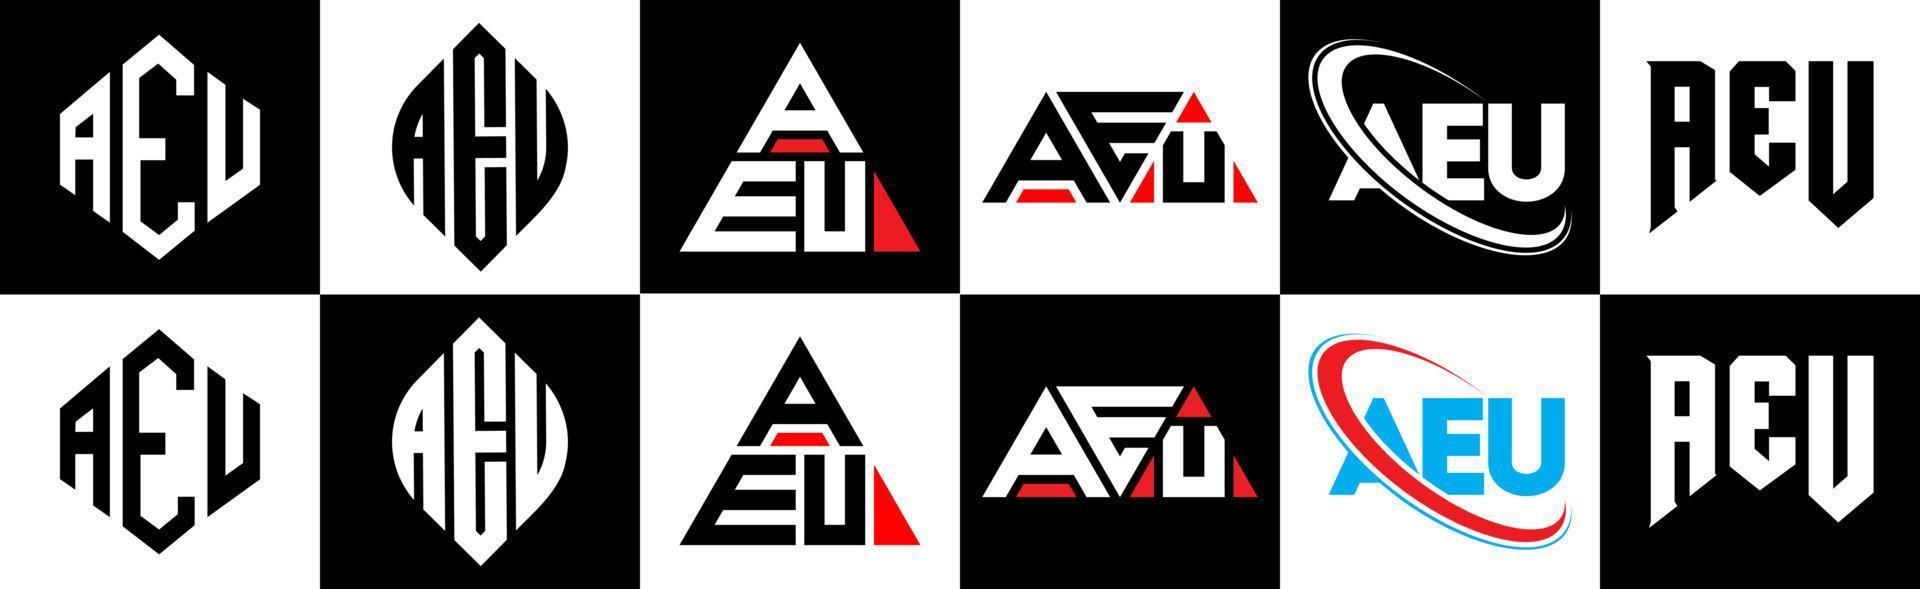 AEU letter logo design in six style. AEU polygon, circle, triangle, hexagon, flat and simple style with black and white color variation letter logo set in one artboard. AEU minimalist and classic logo vector